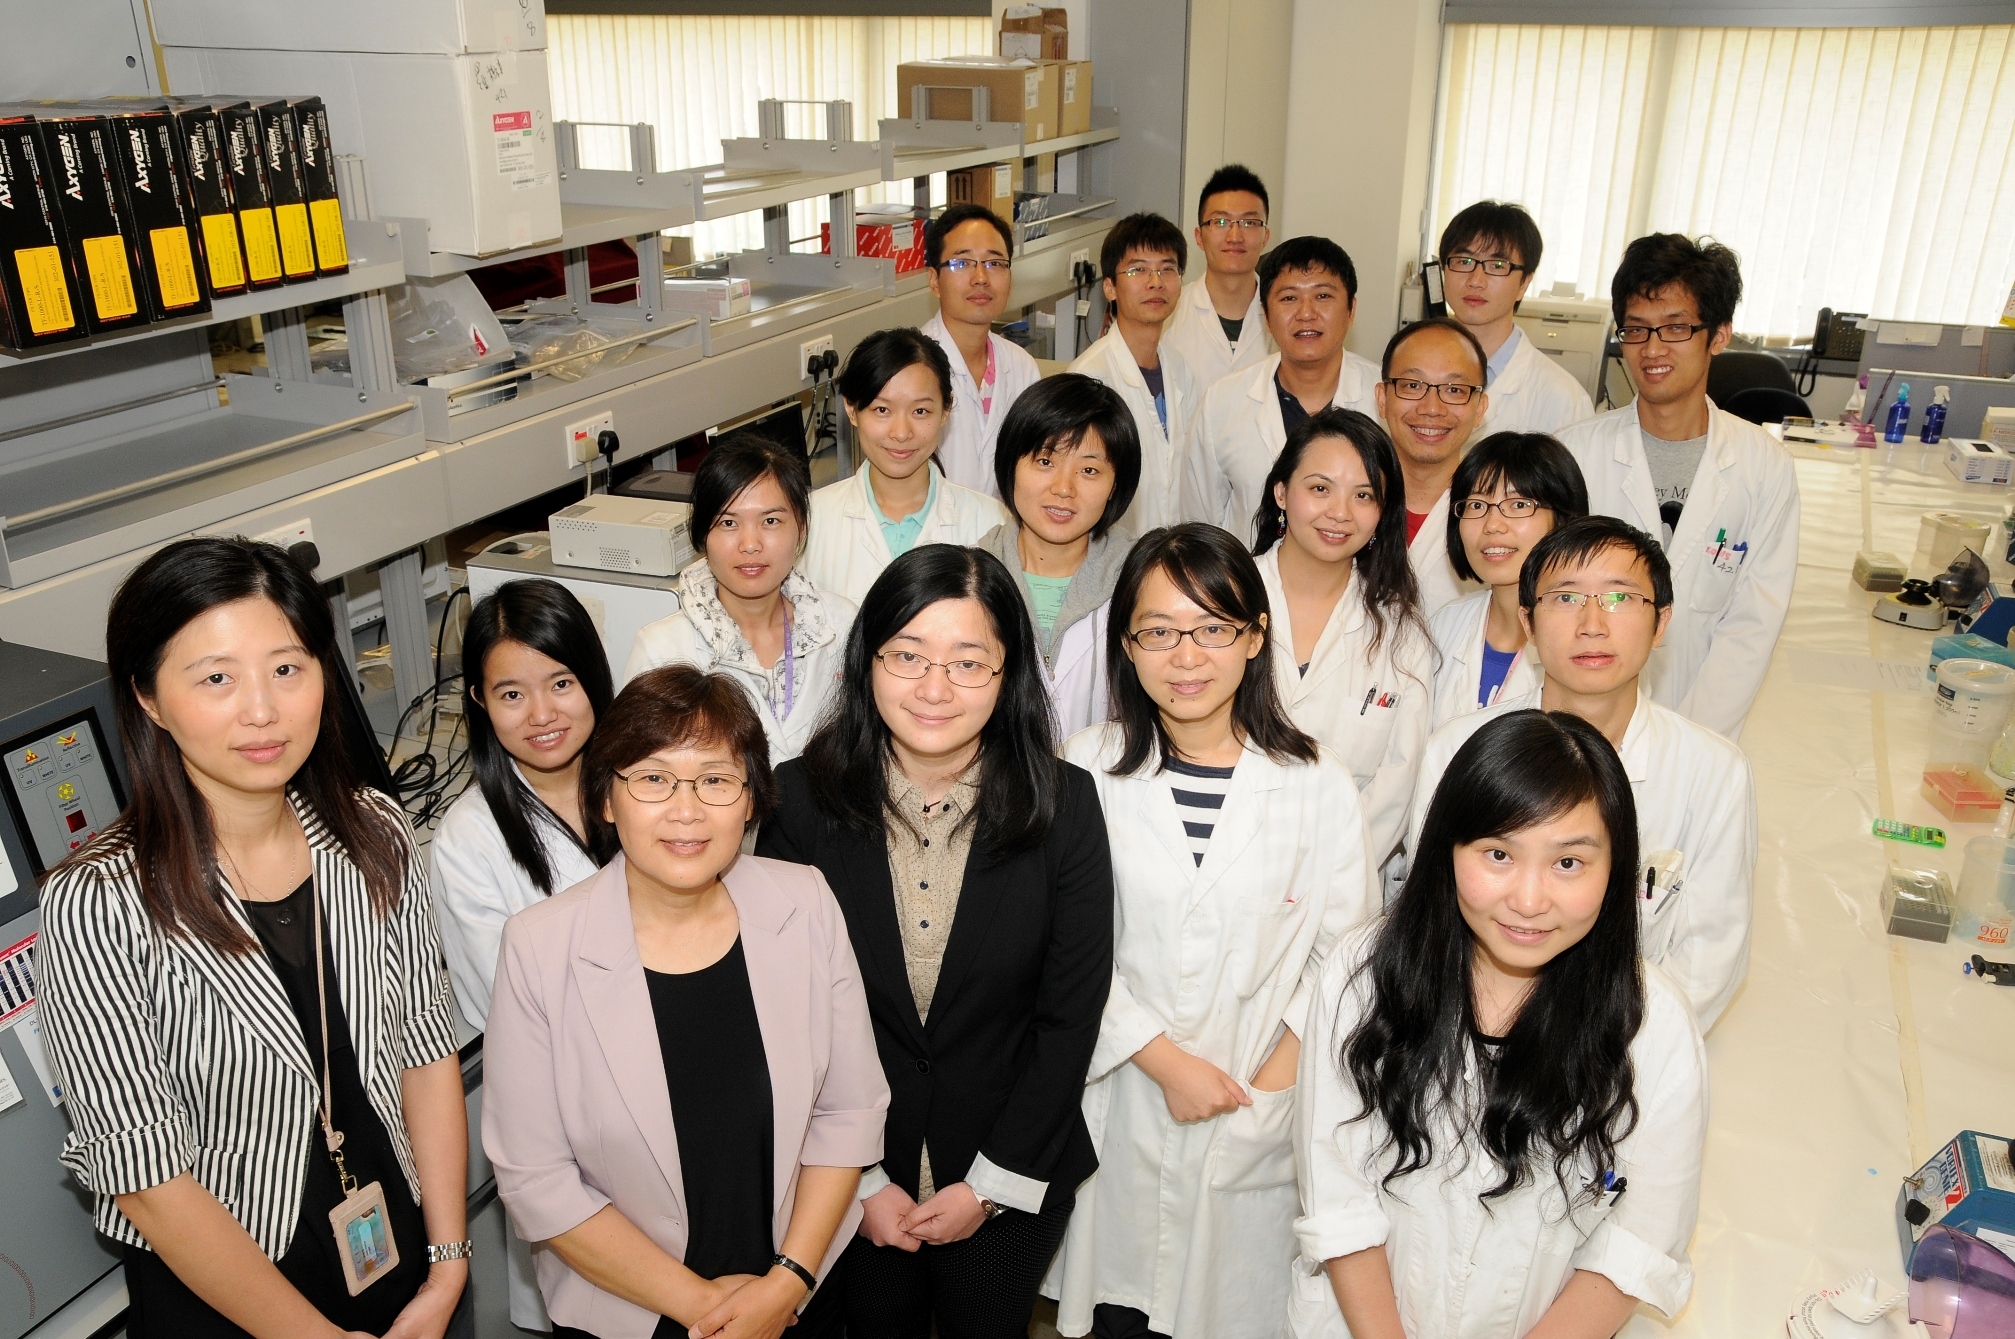 The research team led by Professor Chan